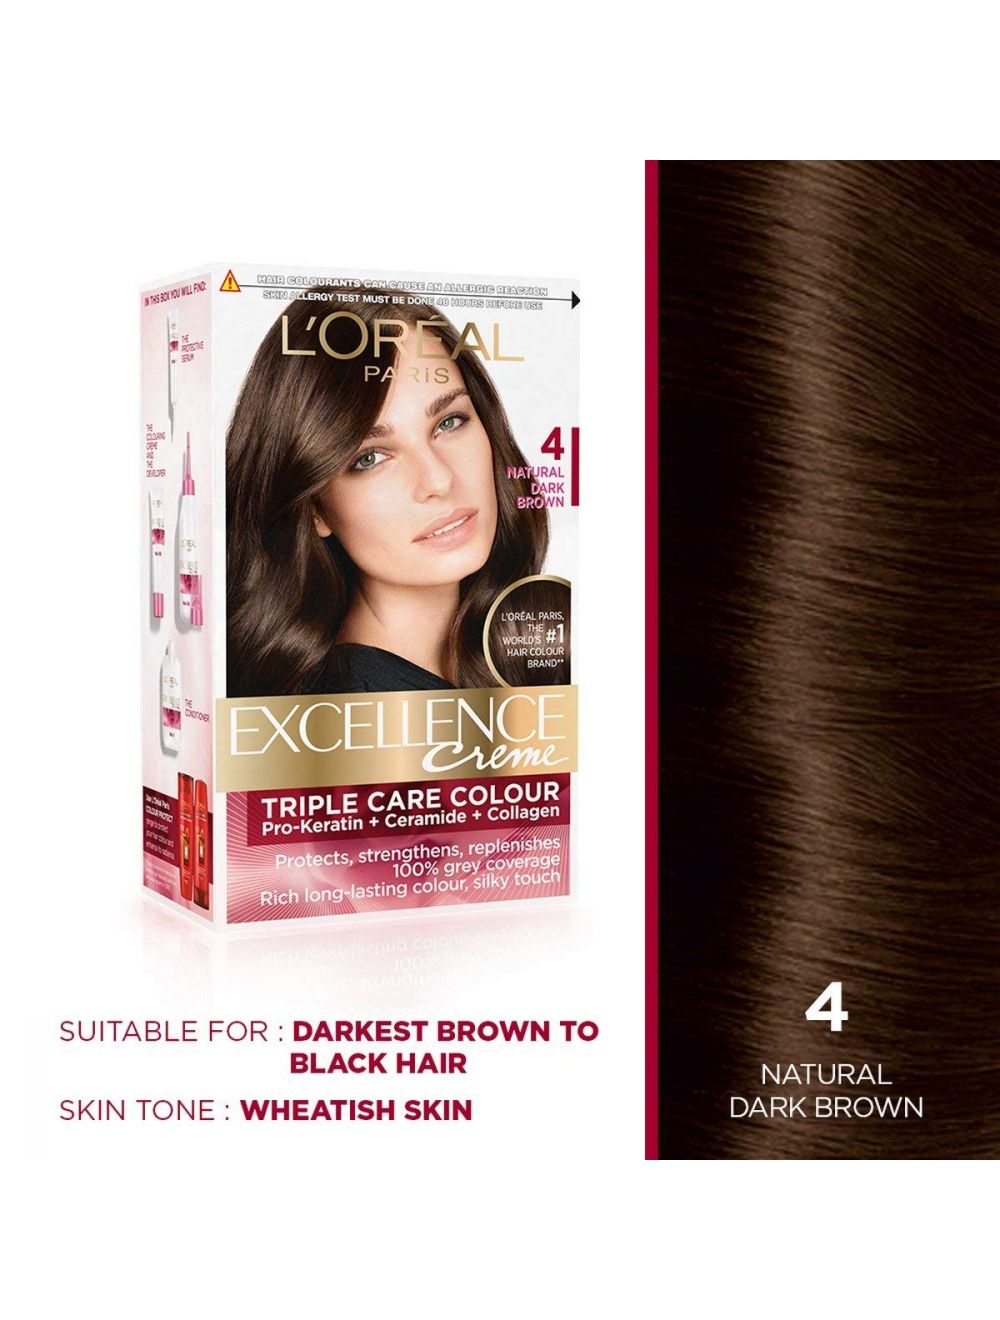 Buy LOreal Paris Excellence Creme Hair Color Online in India